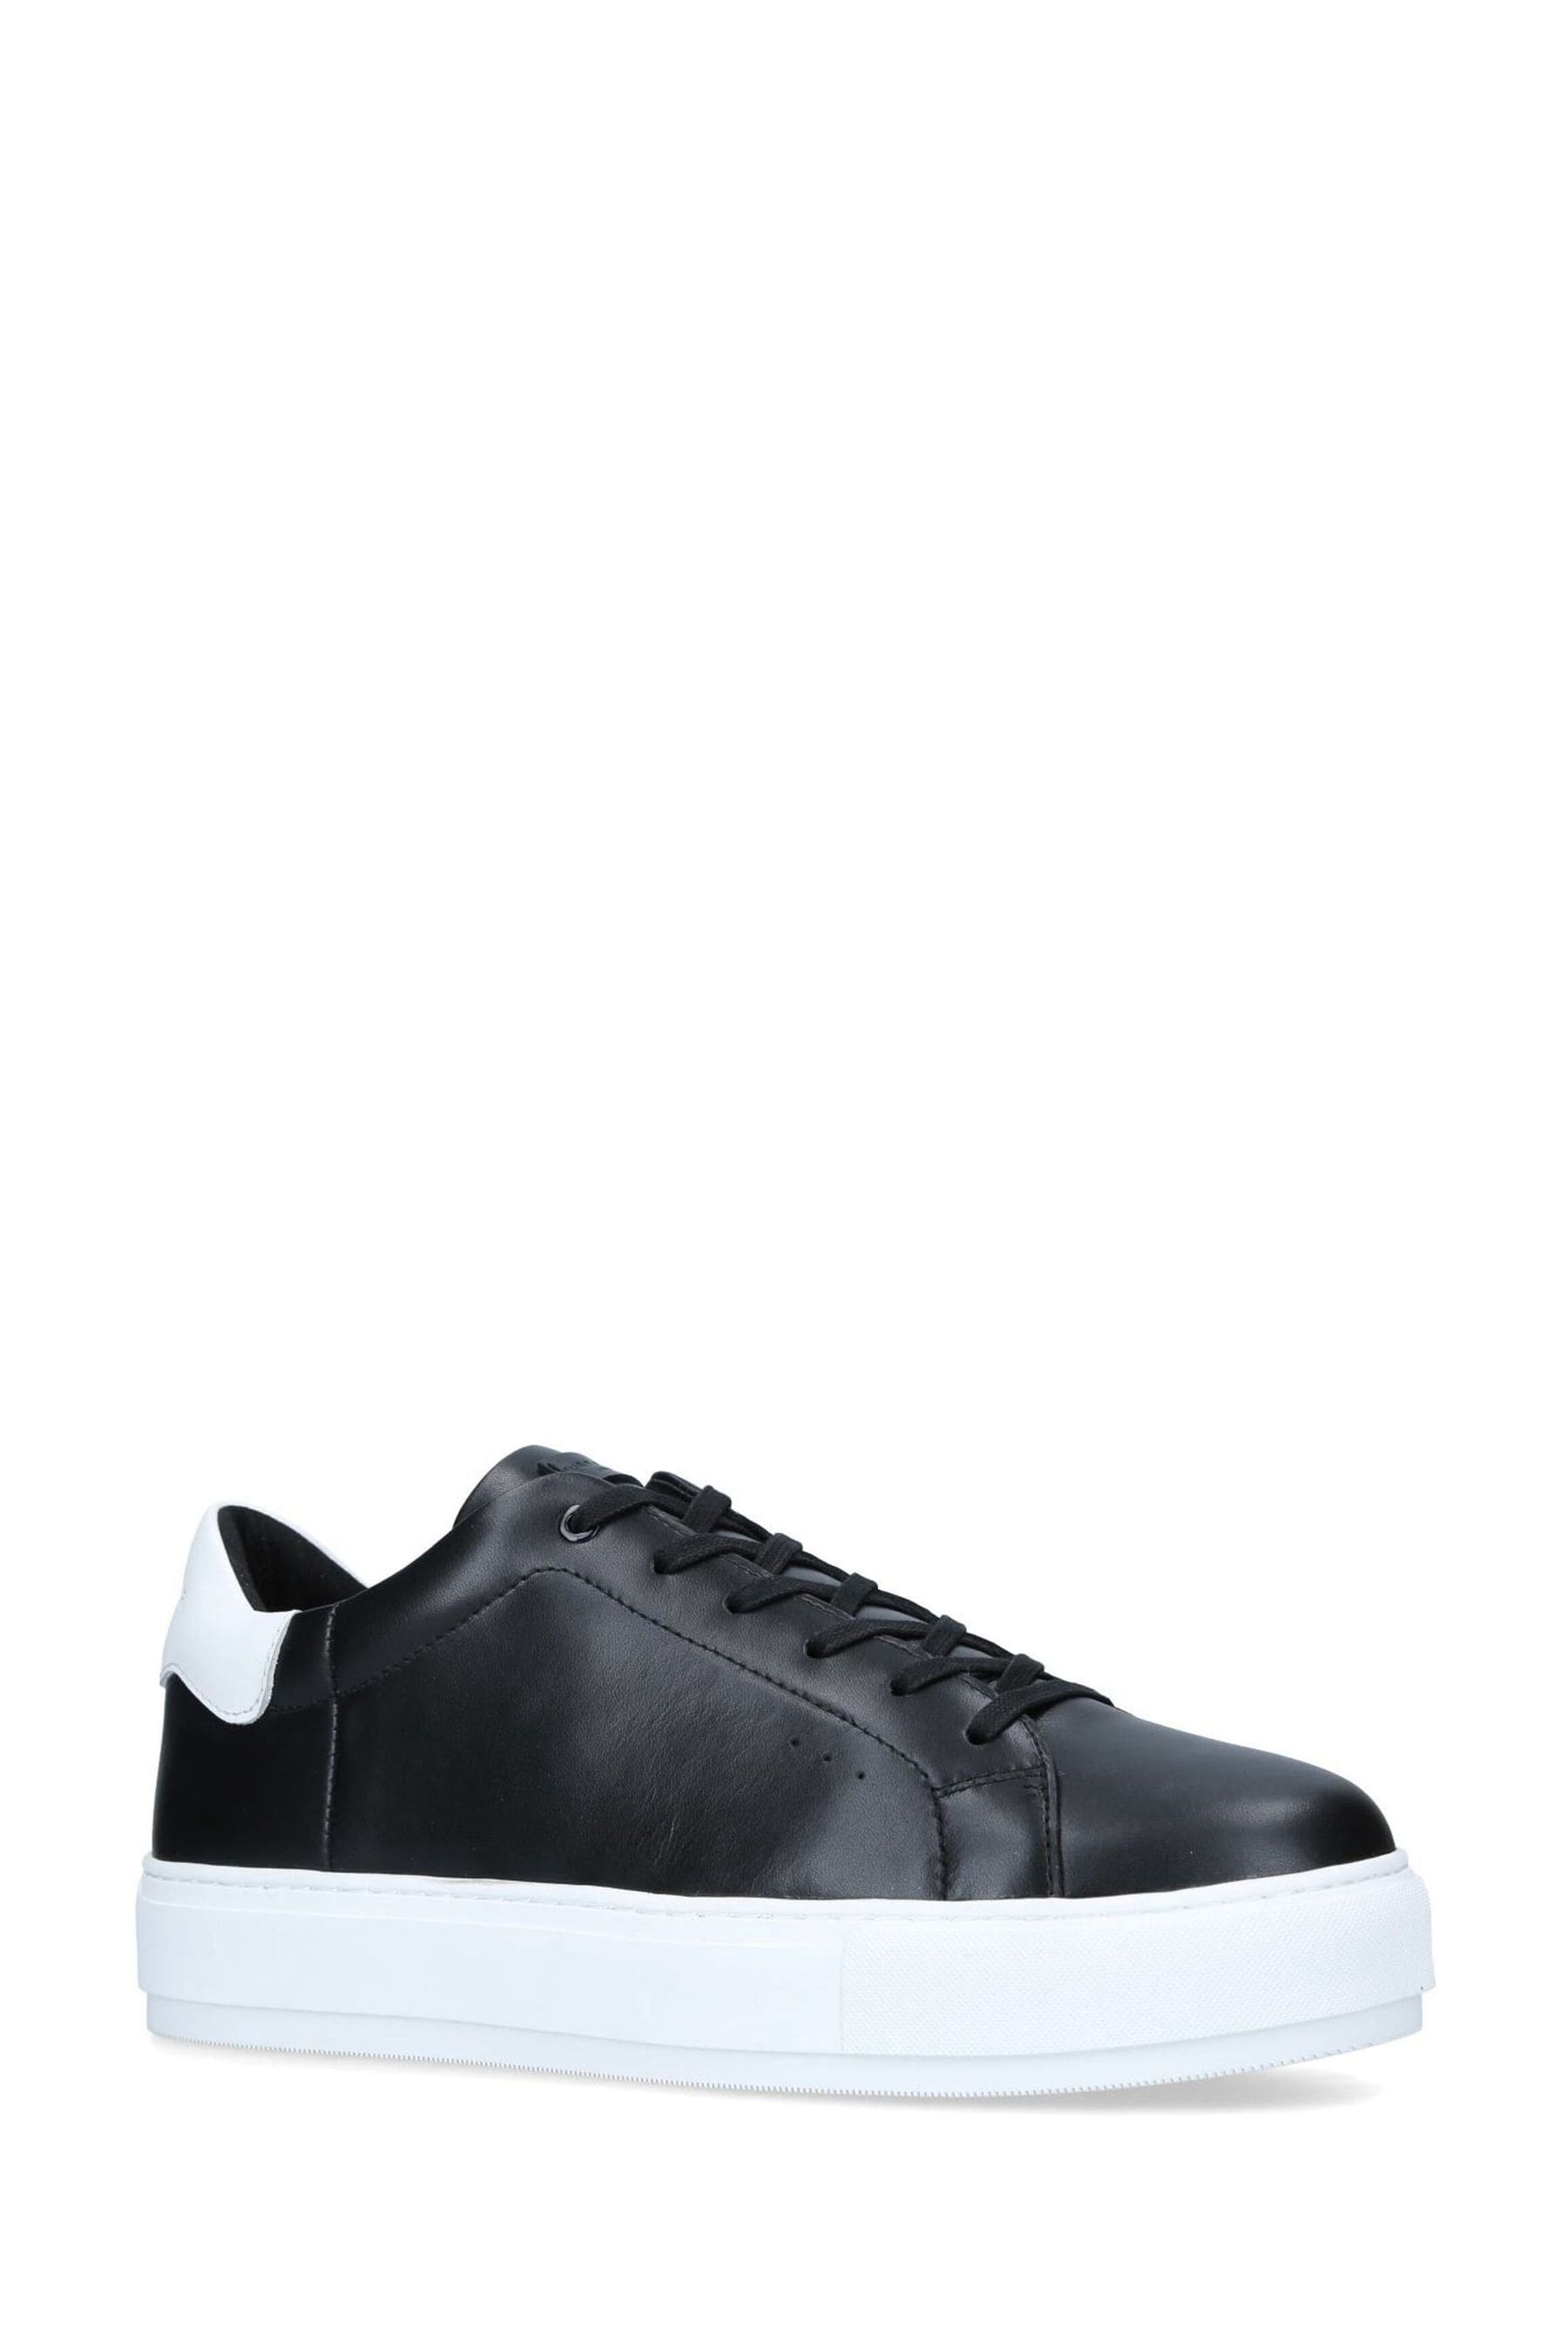 Buy Kurt Geiger London Black Laney Mens Trainers from the Next UK ...